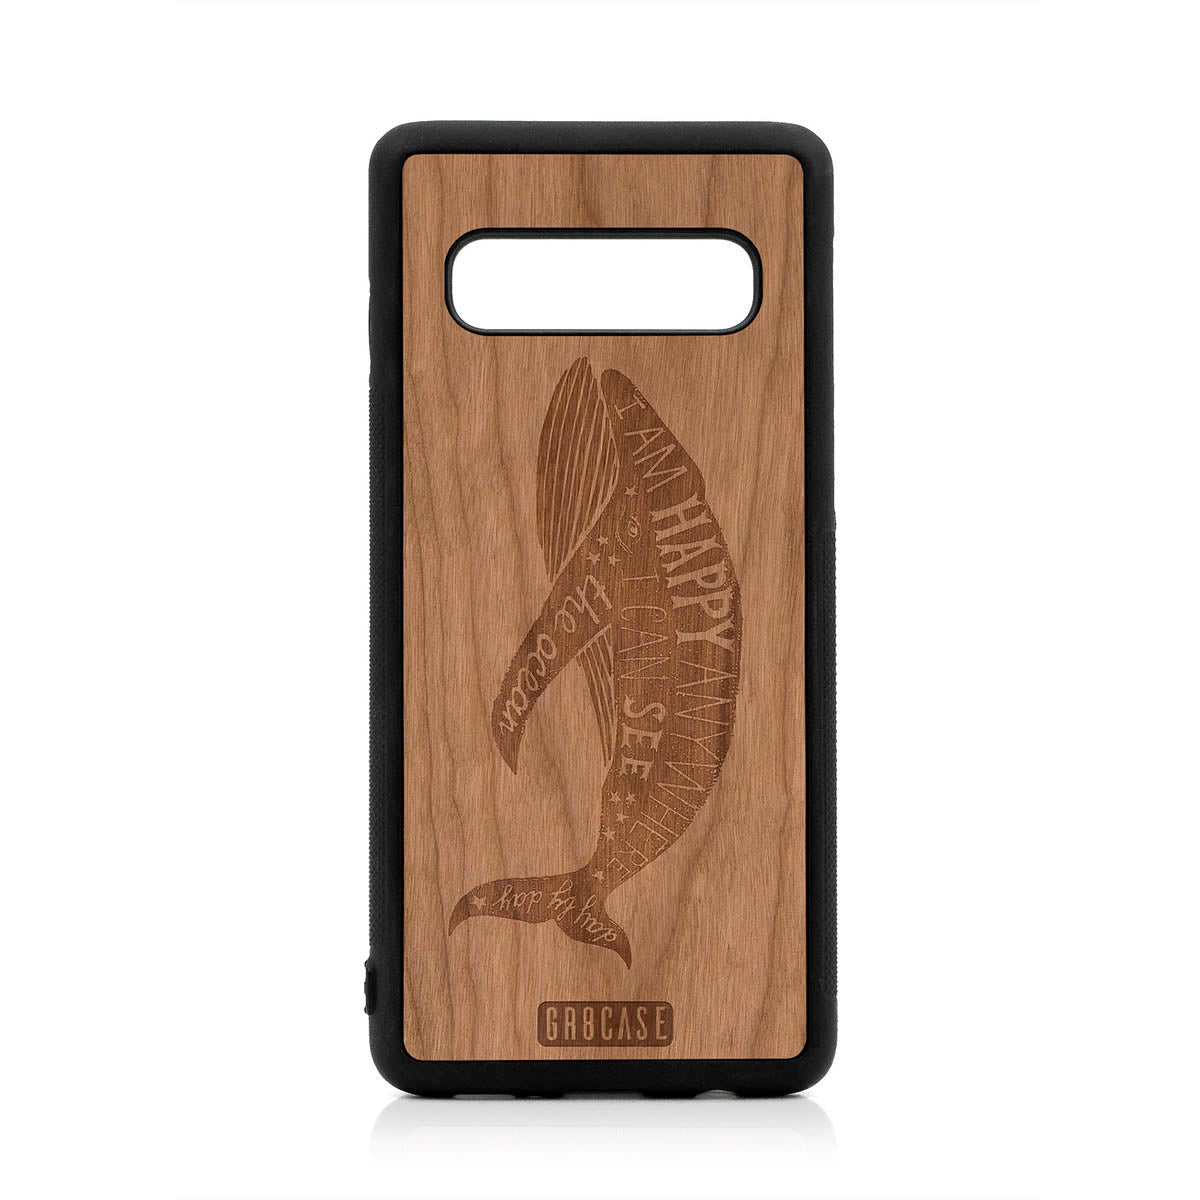 I'm Happy Anywhere I Can See The Ocean (Whale) Design Wood Case For Samsung Galaxy S10